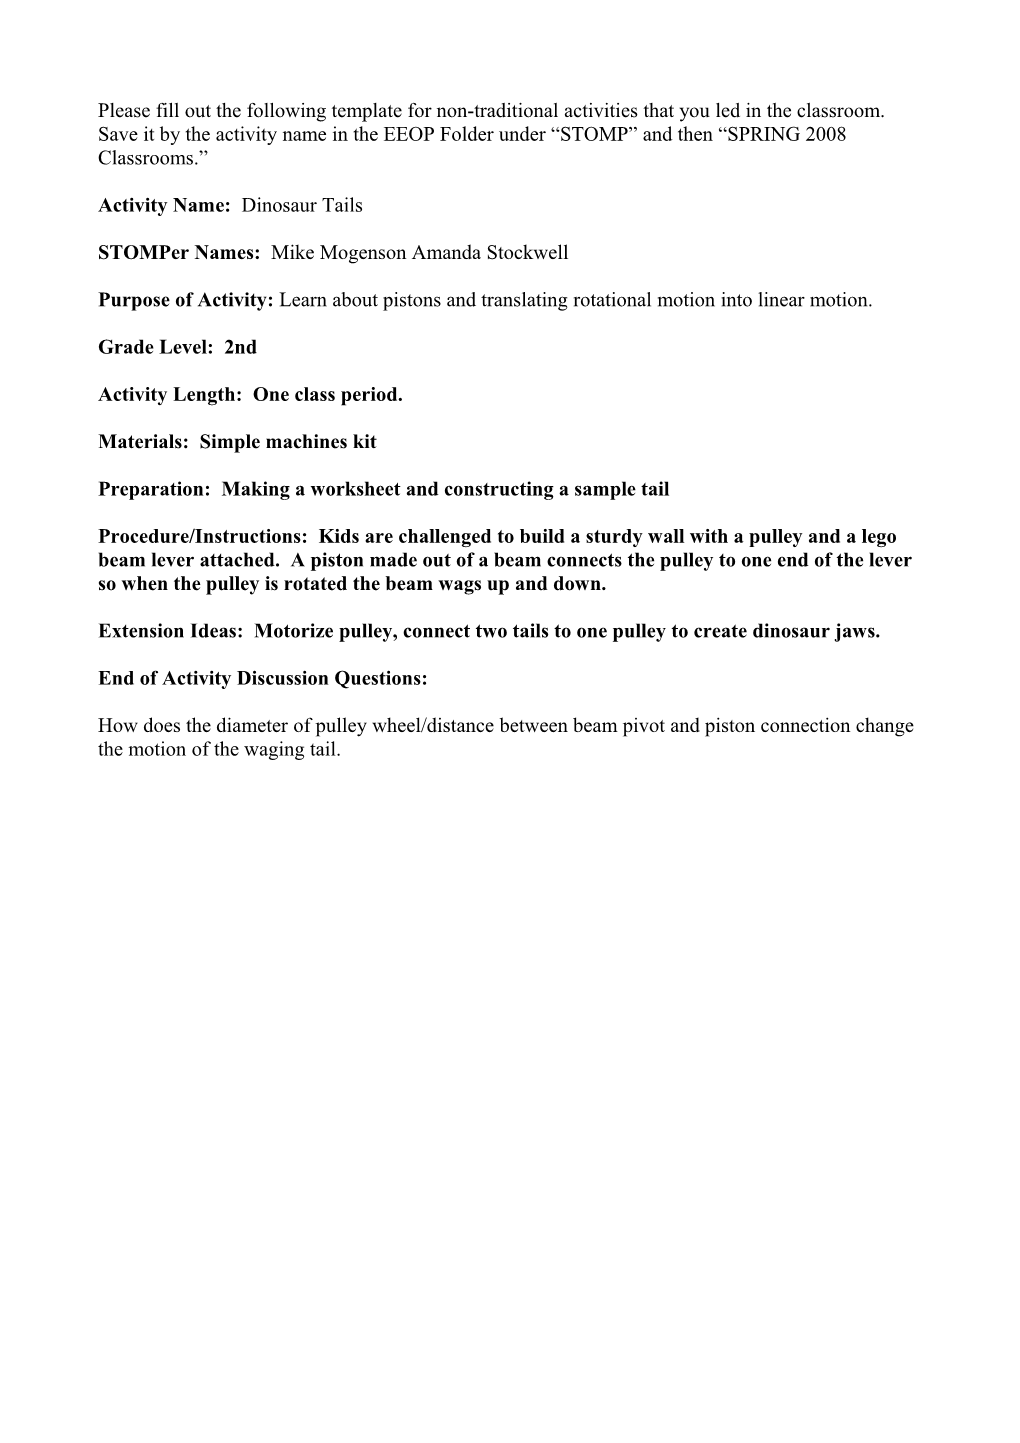 Please Fill out the Following Template for Non-Tradidional Activities That You Led in The